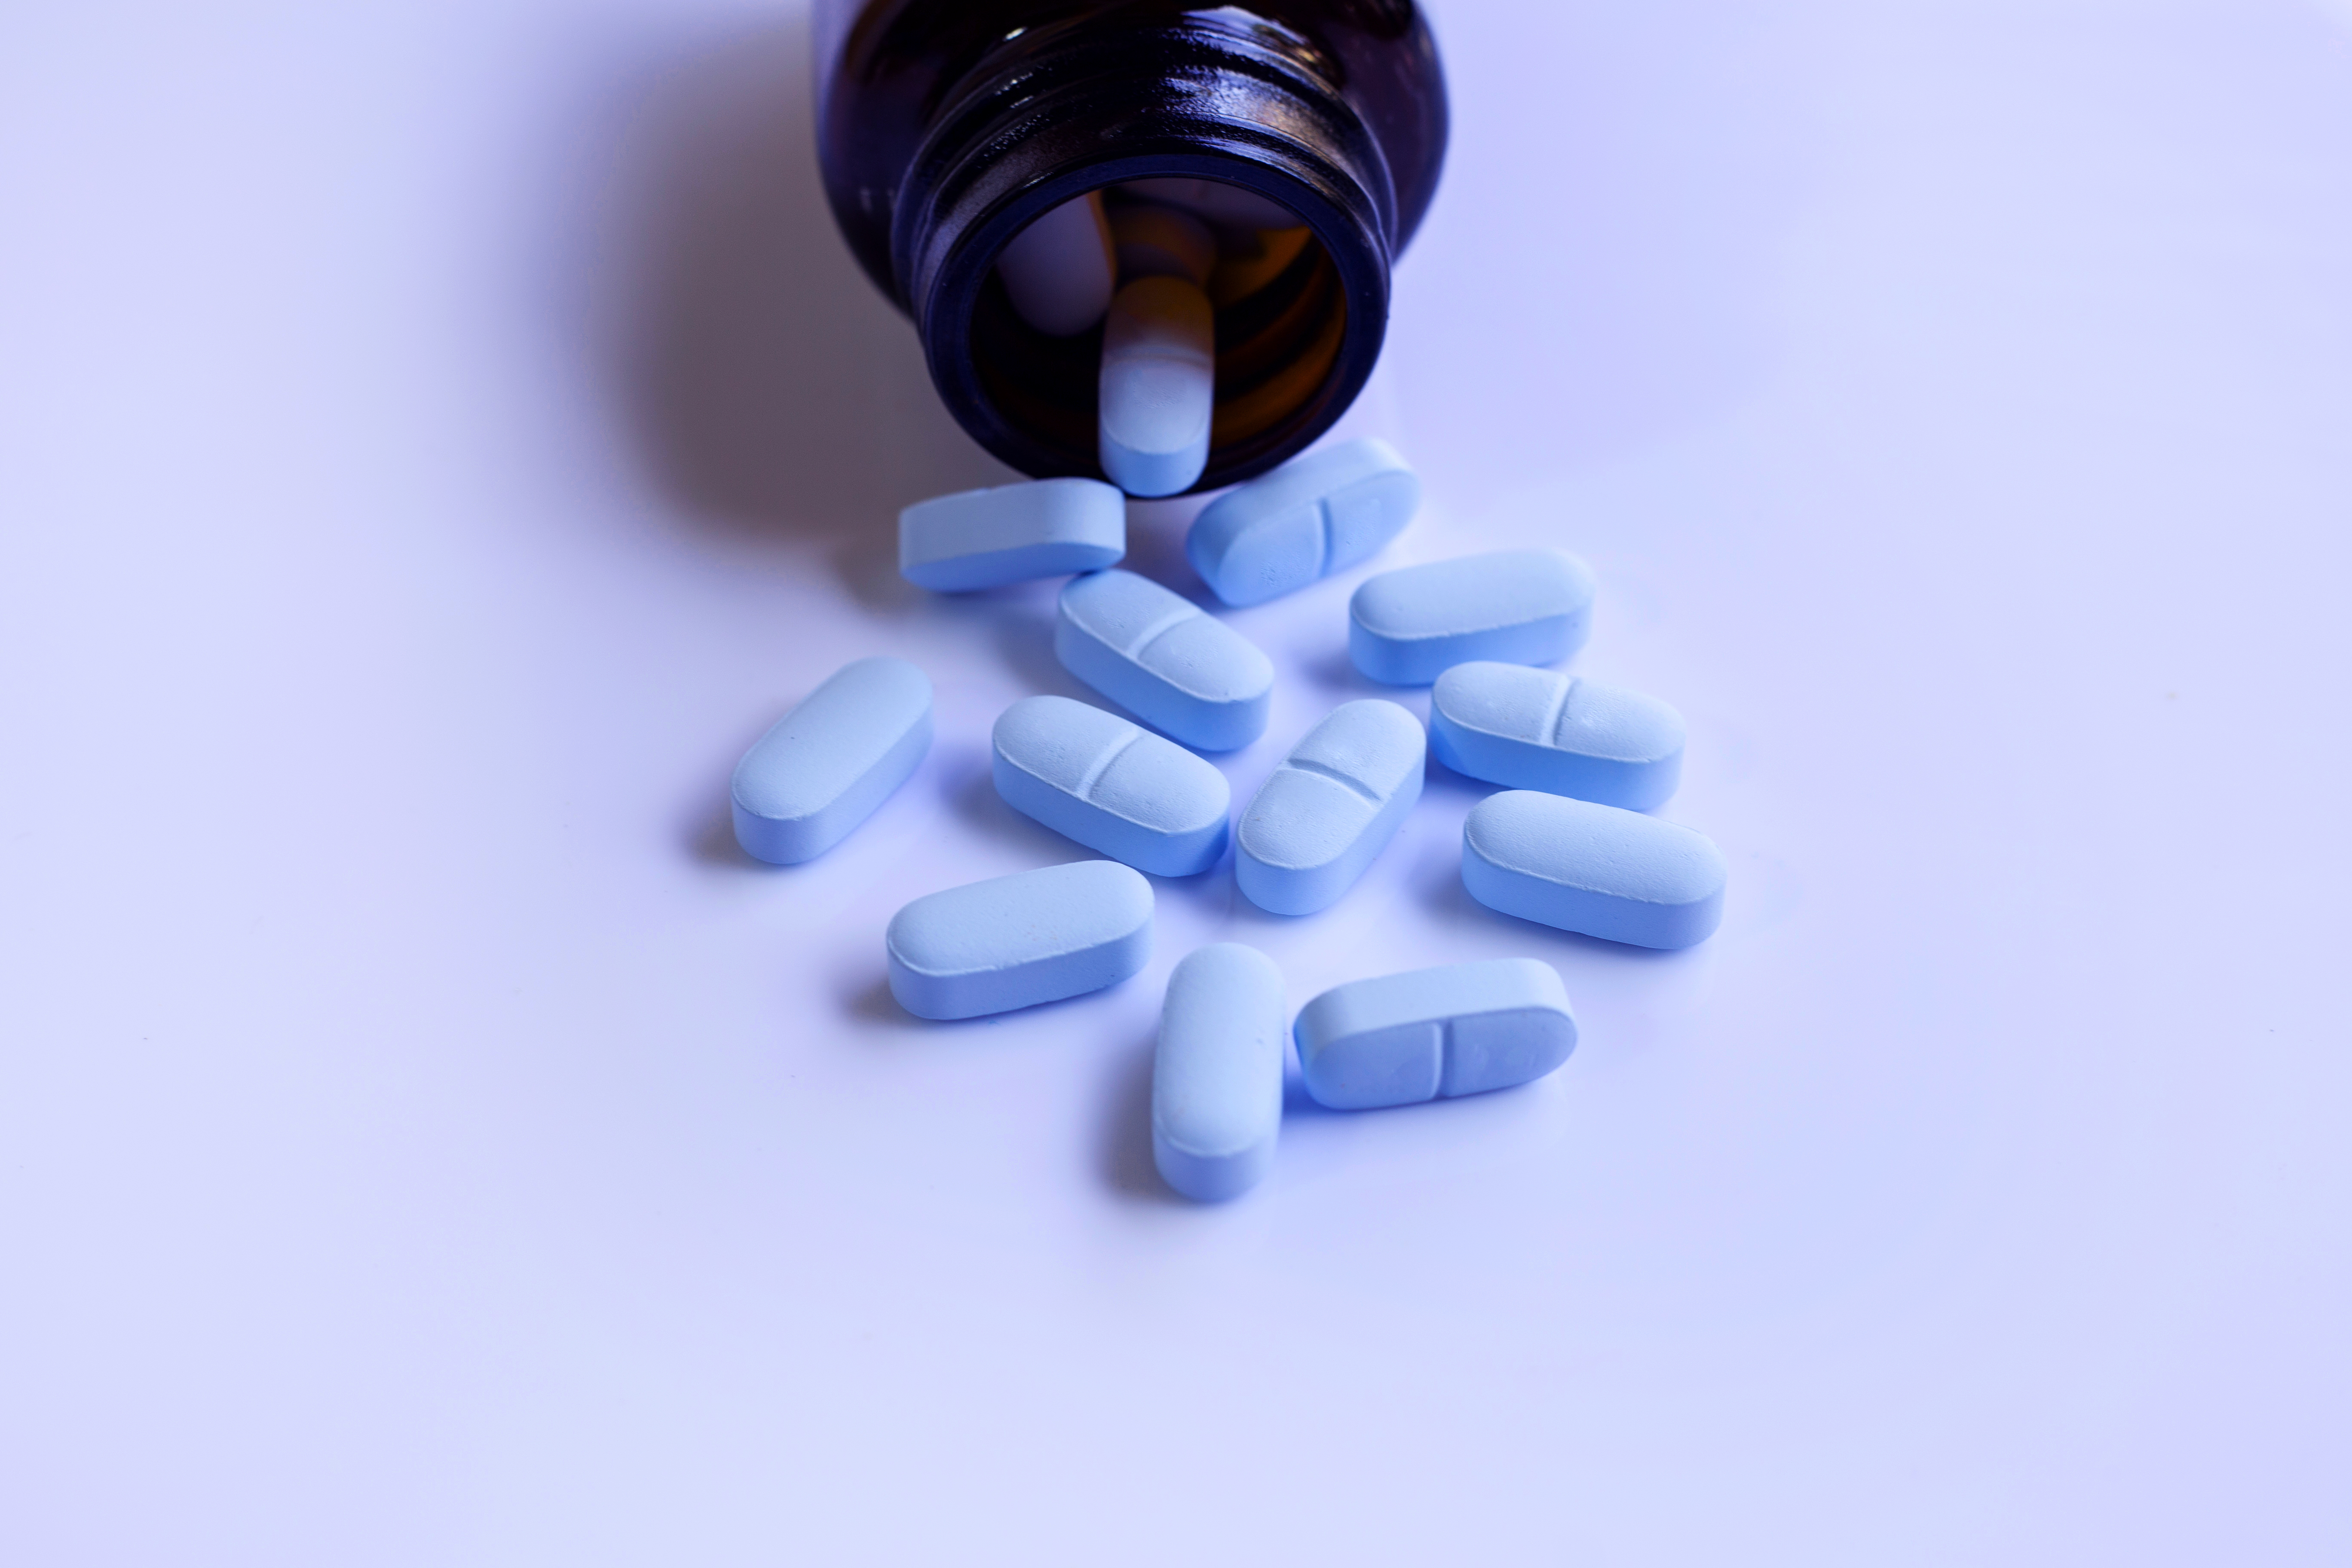 "PrEP" ( Pre-Exposure Prophylaxis). used to prevent HIV.